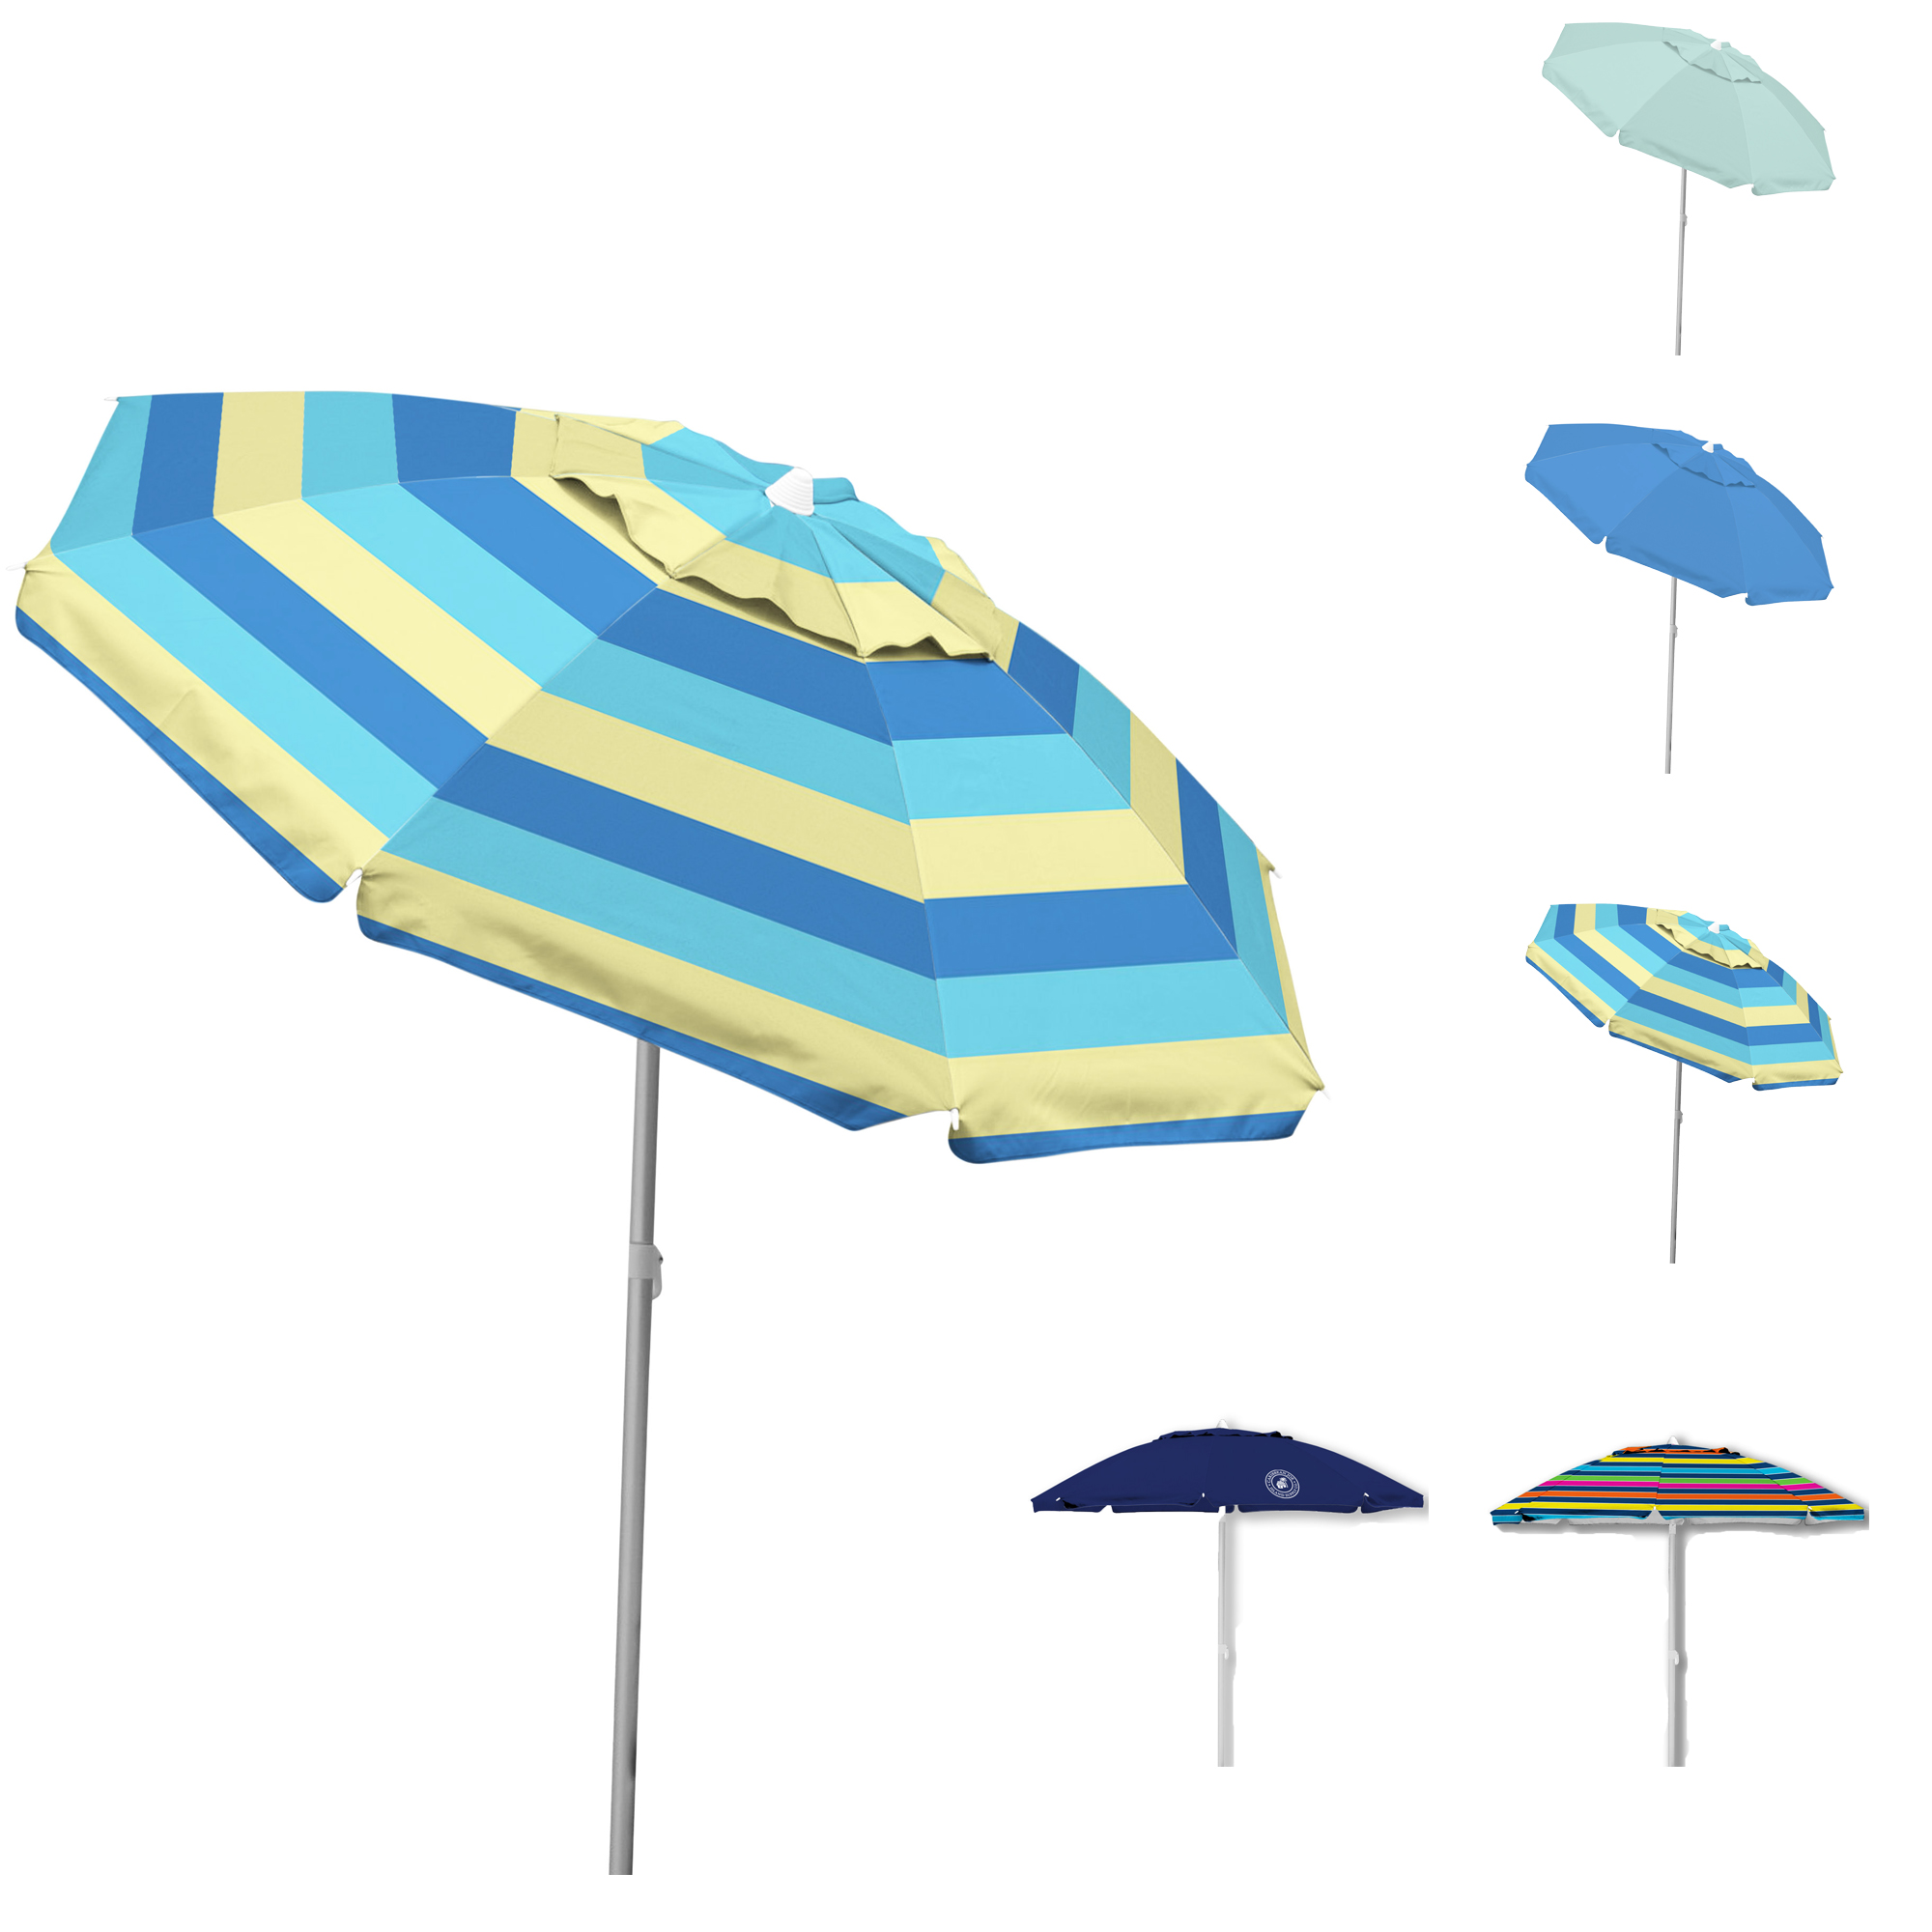 6.5' Caribbean Joe Beach UMBRELLA w/ UV Protection & Matching Carrying Case - Choose Your Color(s)